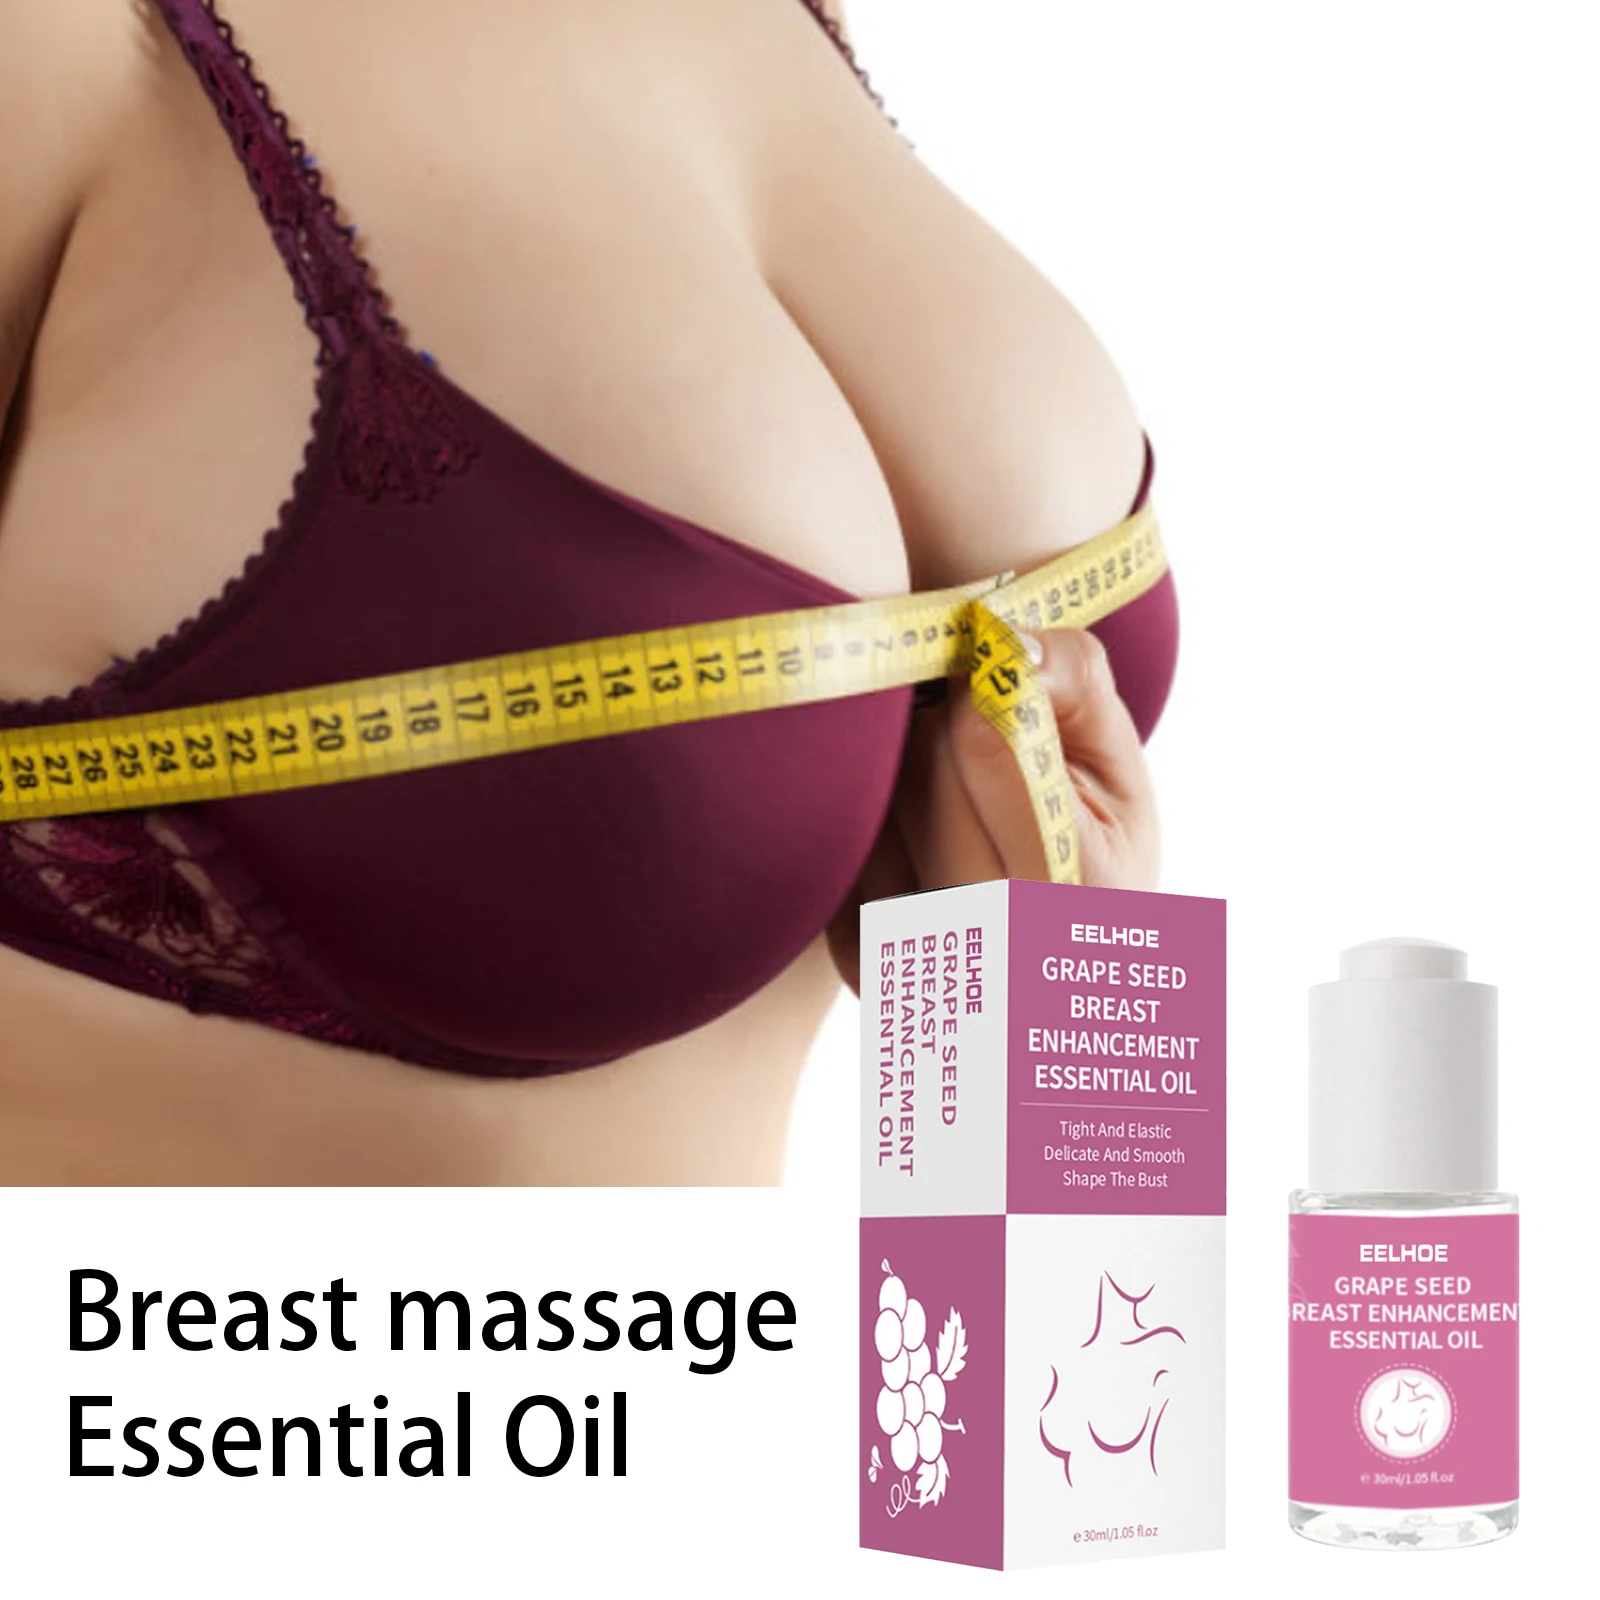 

30ml Grape Seed Breast Enhancement Oil Breast Massage Firming Elastic Breast Beauty Milk Delicate And Smooth Shape The Bust